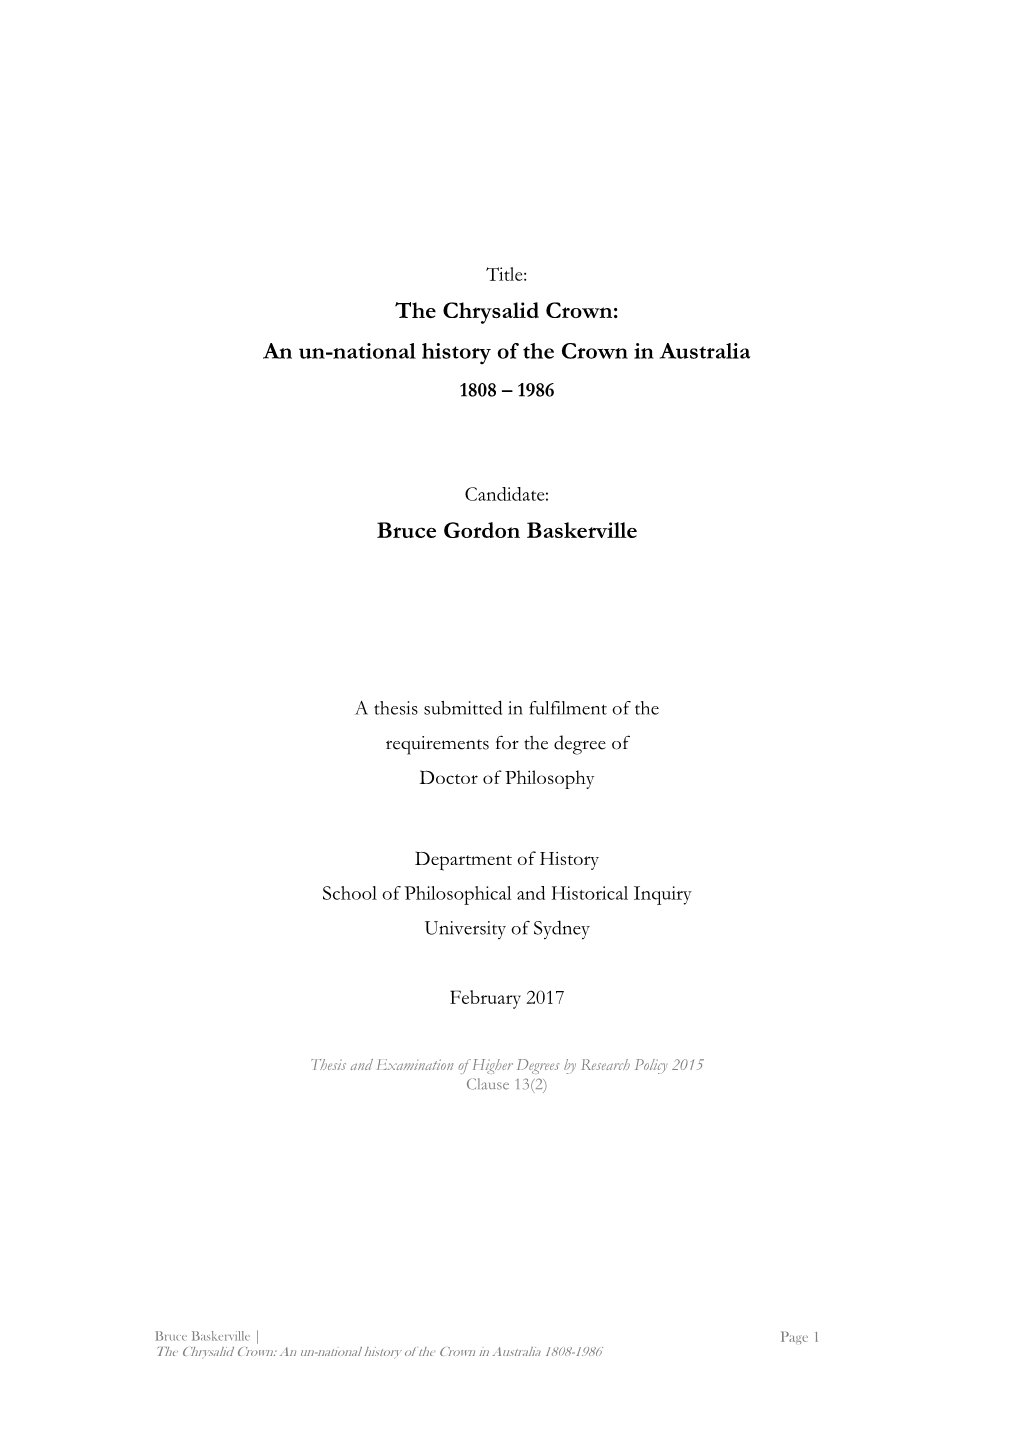 An Un-National History of the Crown in Australia Bruce Gordon Baskerville